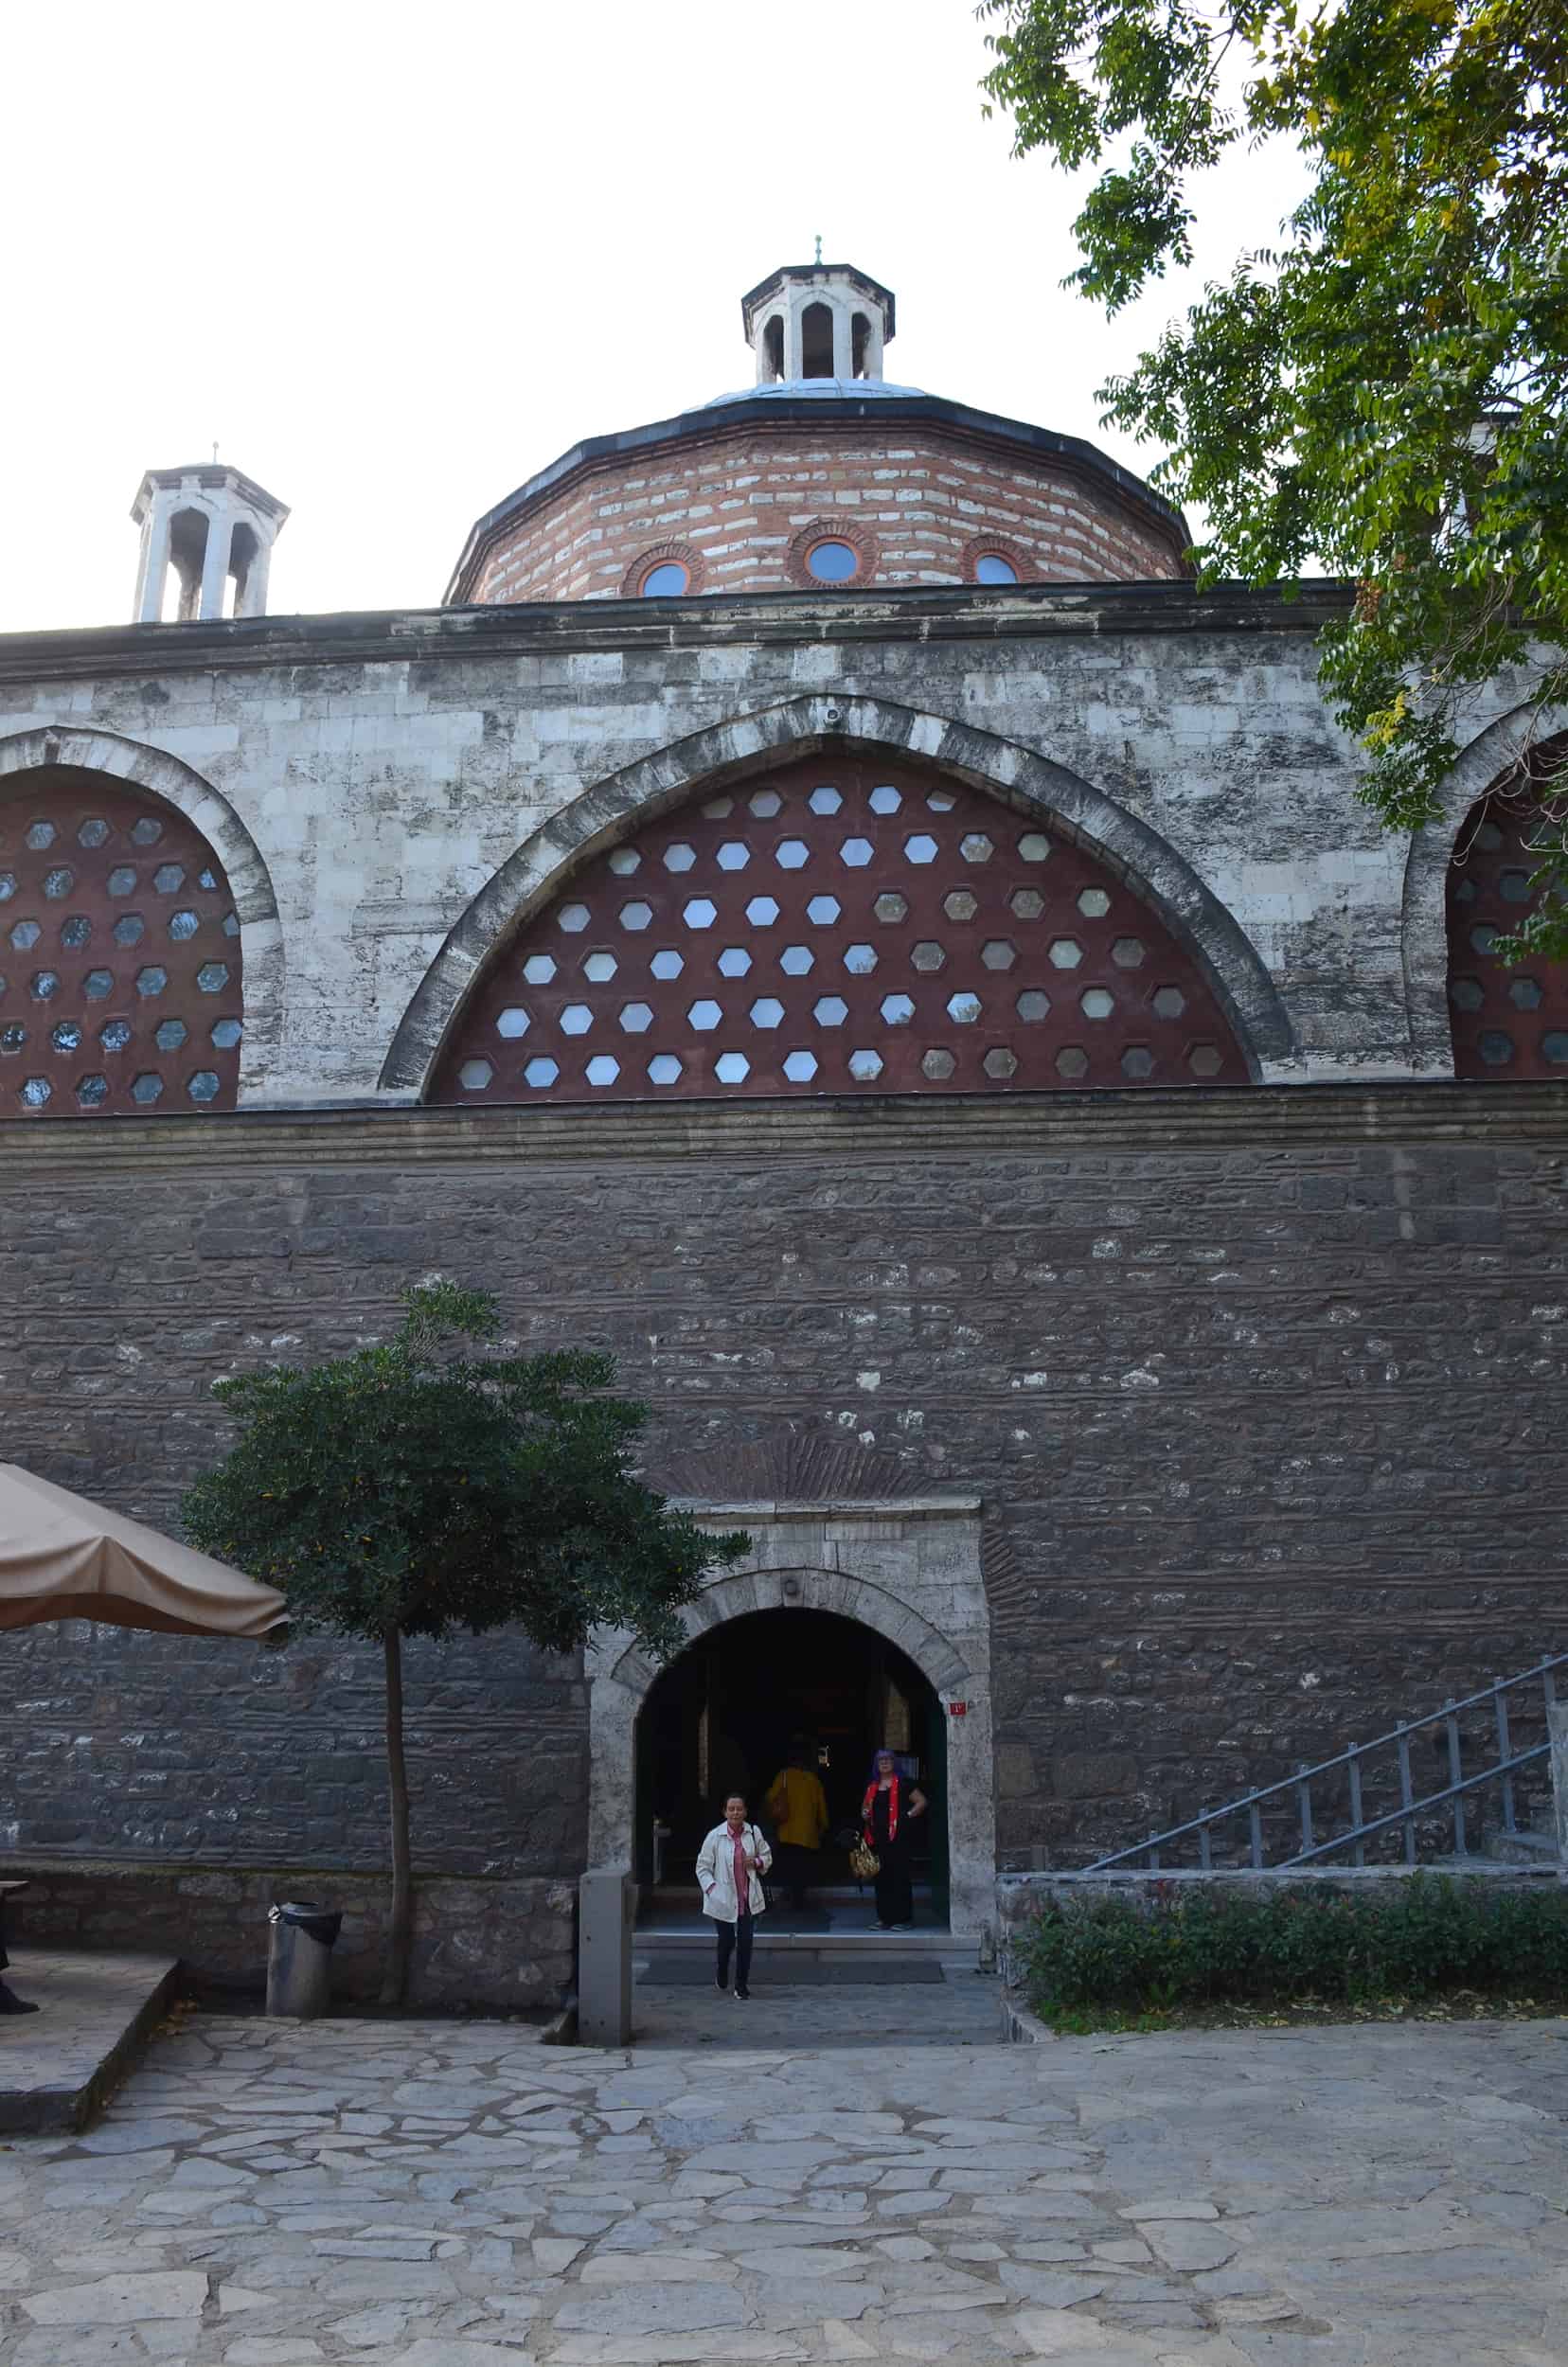 Entrance to the Five Domes gallery at Tophane-i Amire Culture and Art Center in Tophane, Istanbul, Turkey